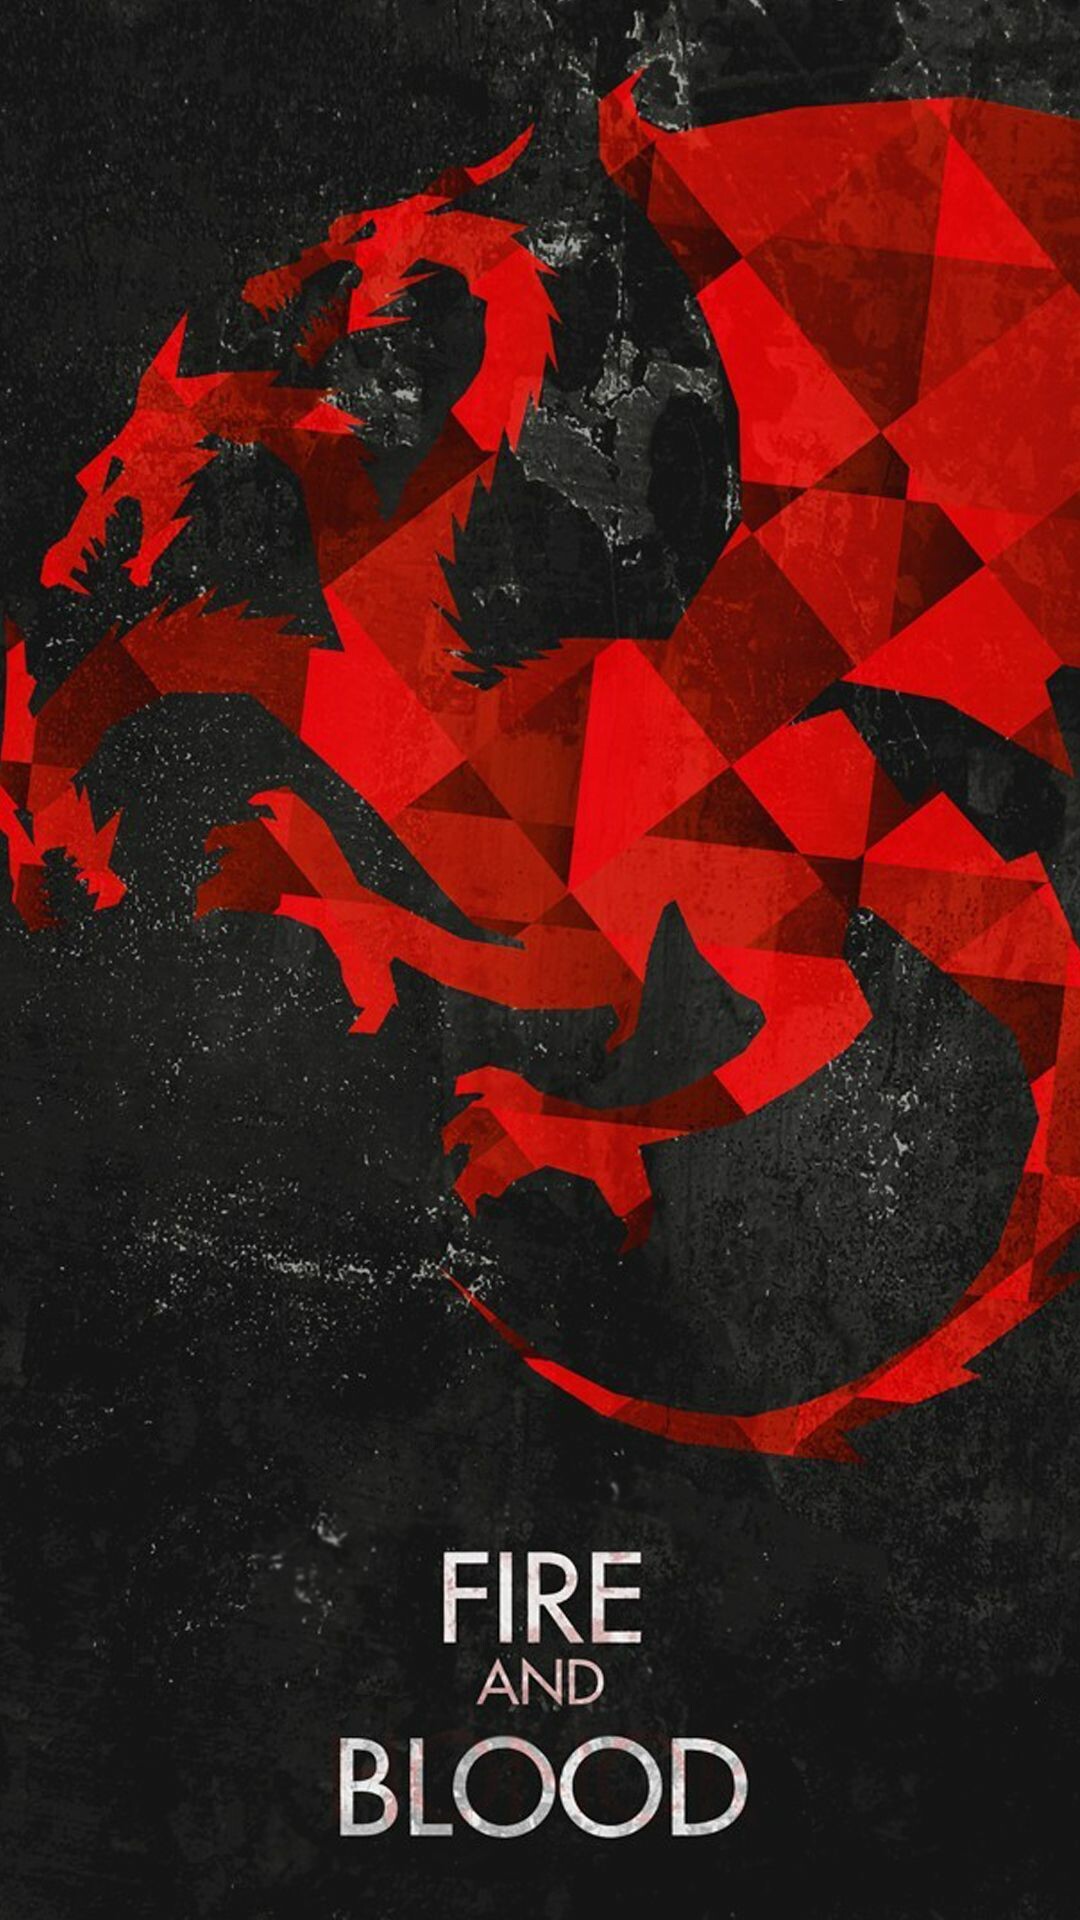 Game Of Thrones Dragon Minimalist Wallpapers